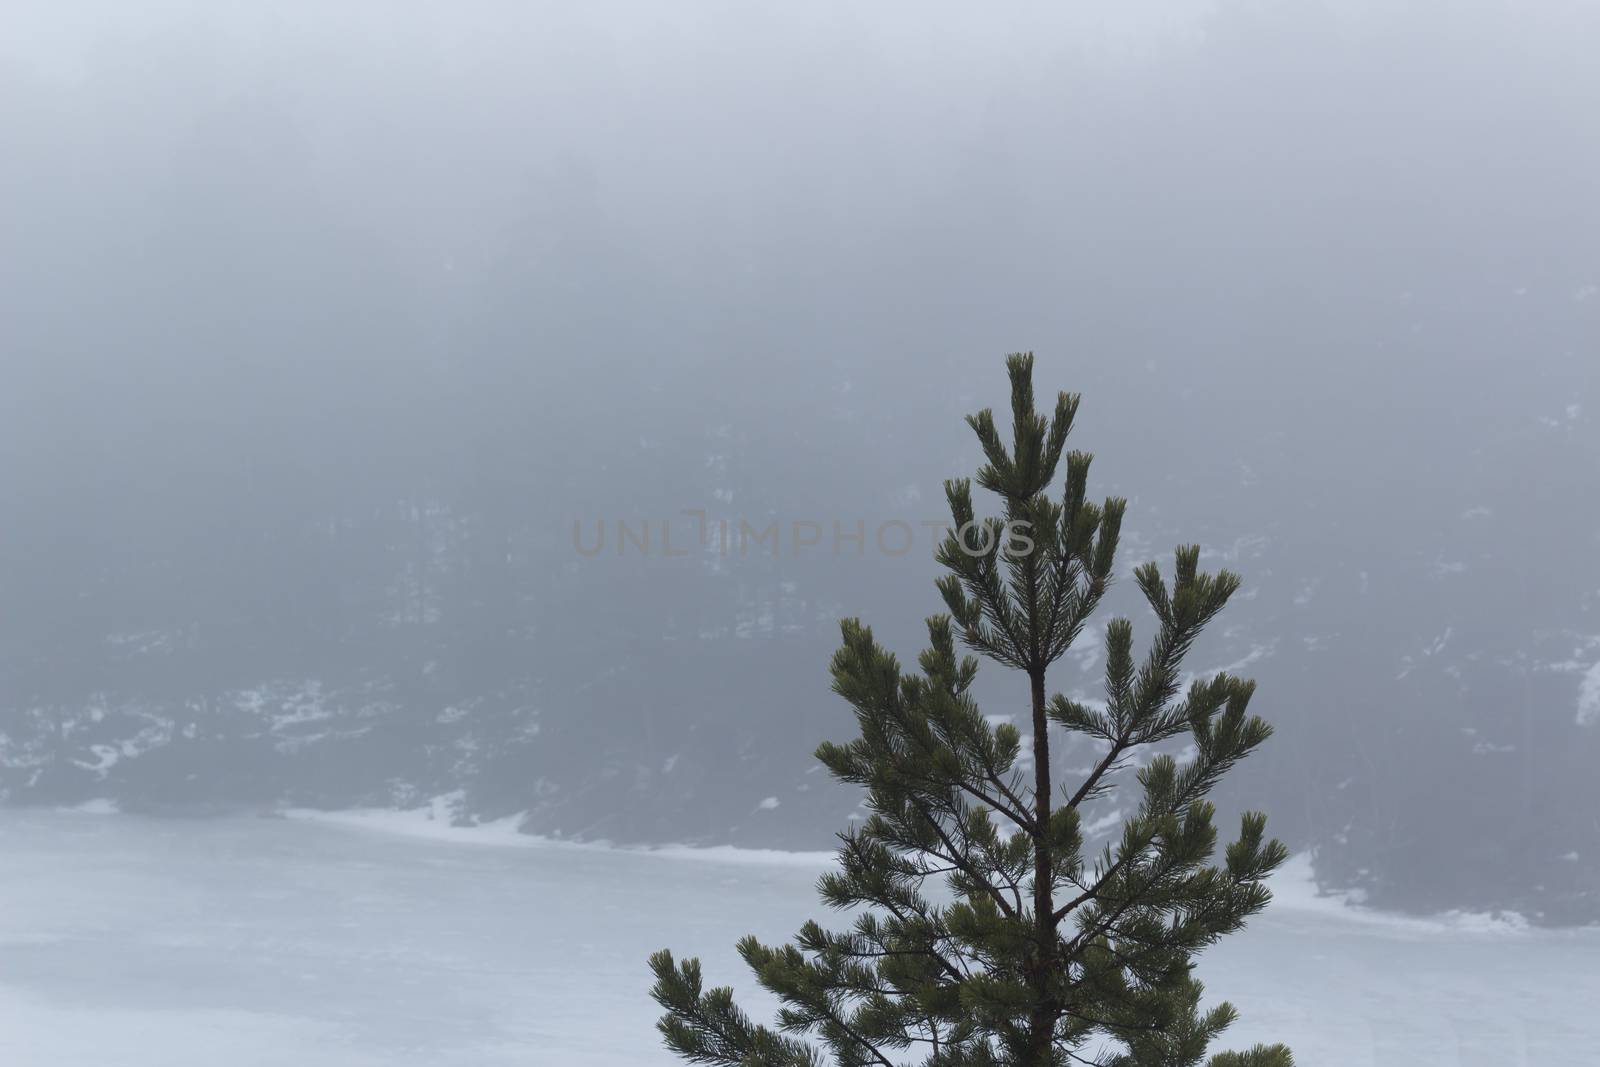 Frozen lake surrounded by mountains with pine and fir trees on a misty, moody, day. Isolated pine tree in the foreground. Nackareservatet - nature reserve in Sweden